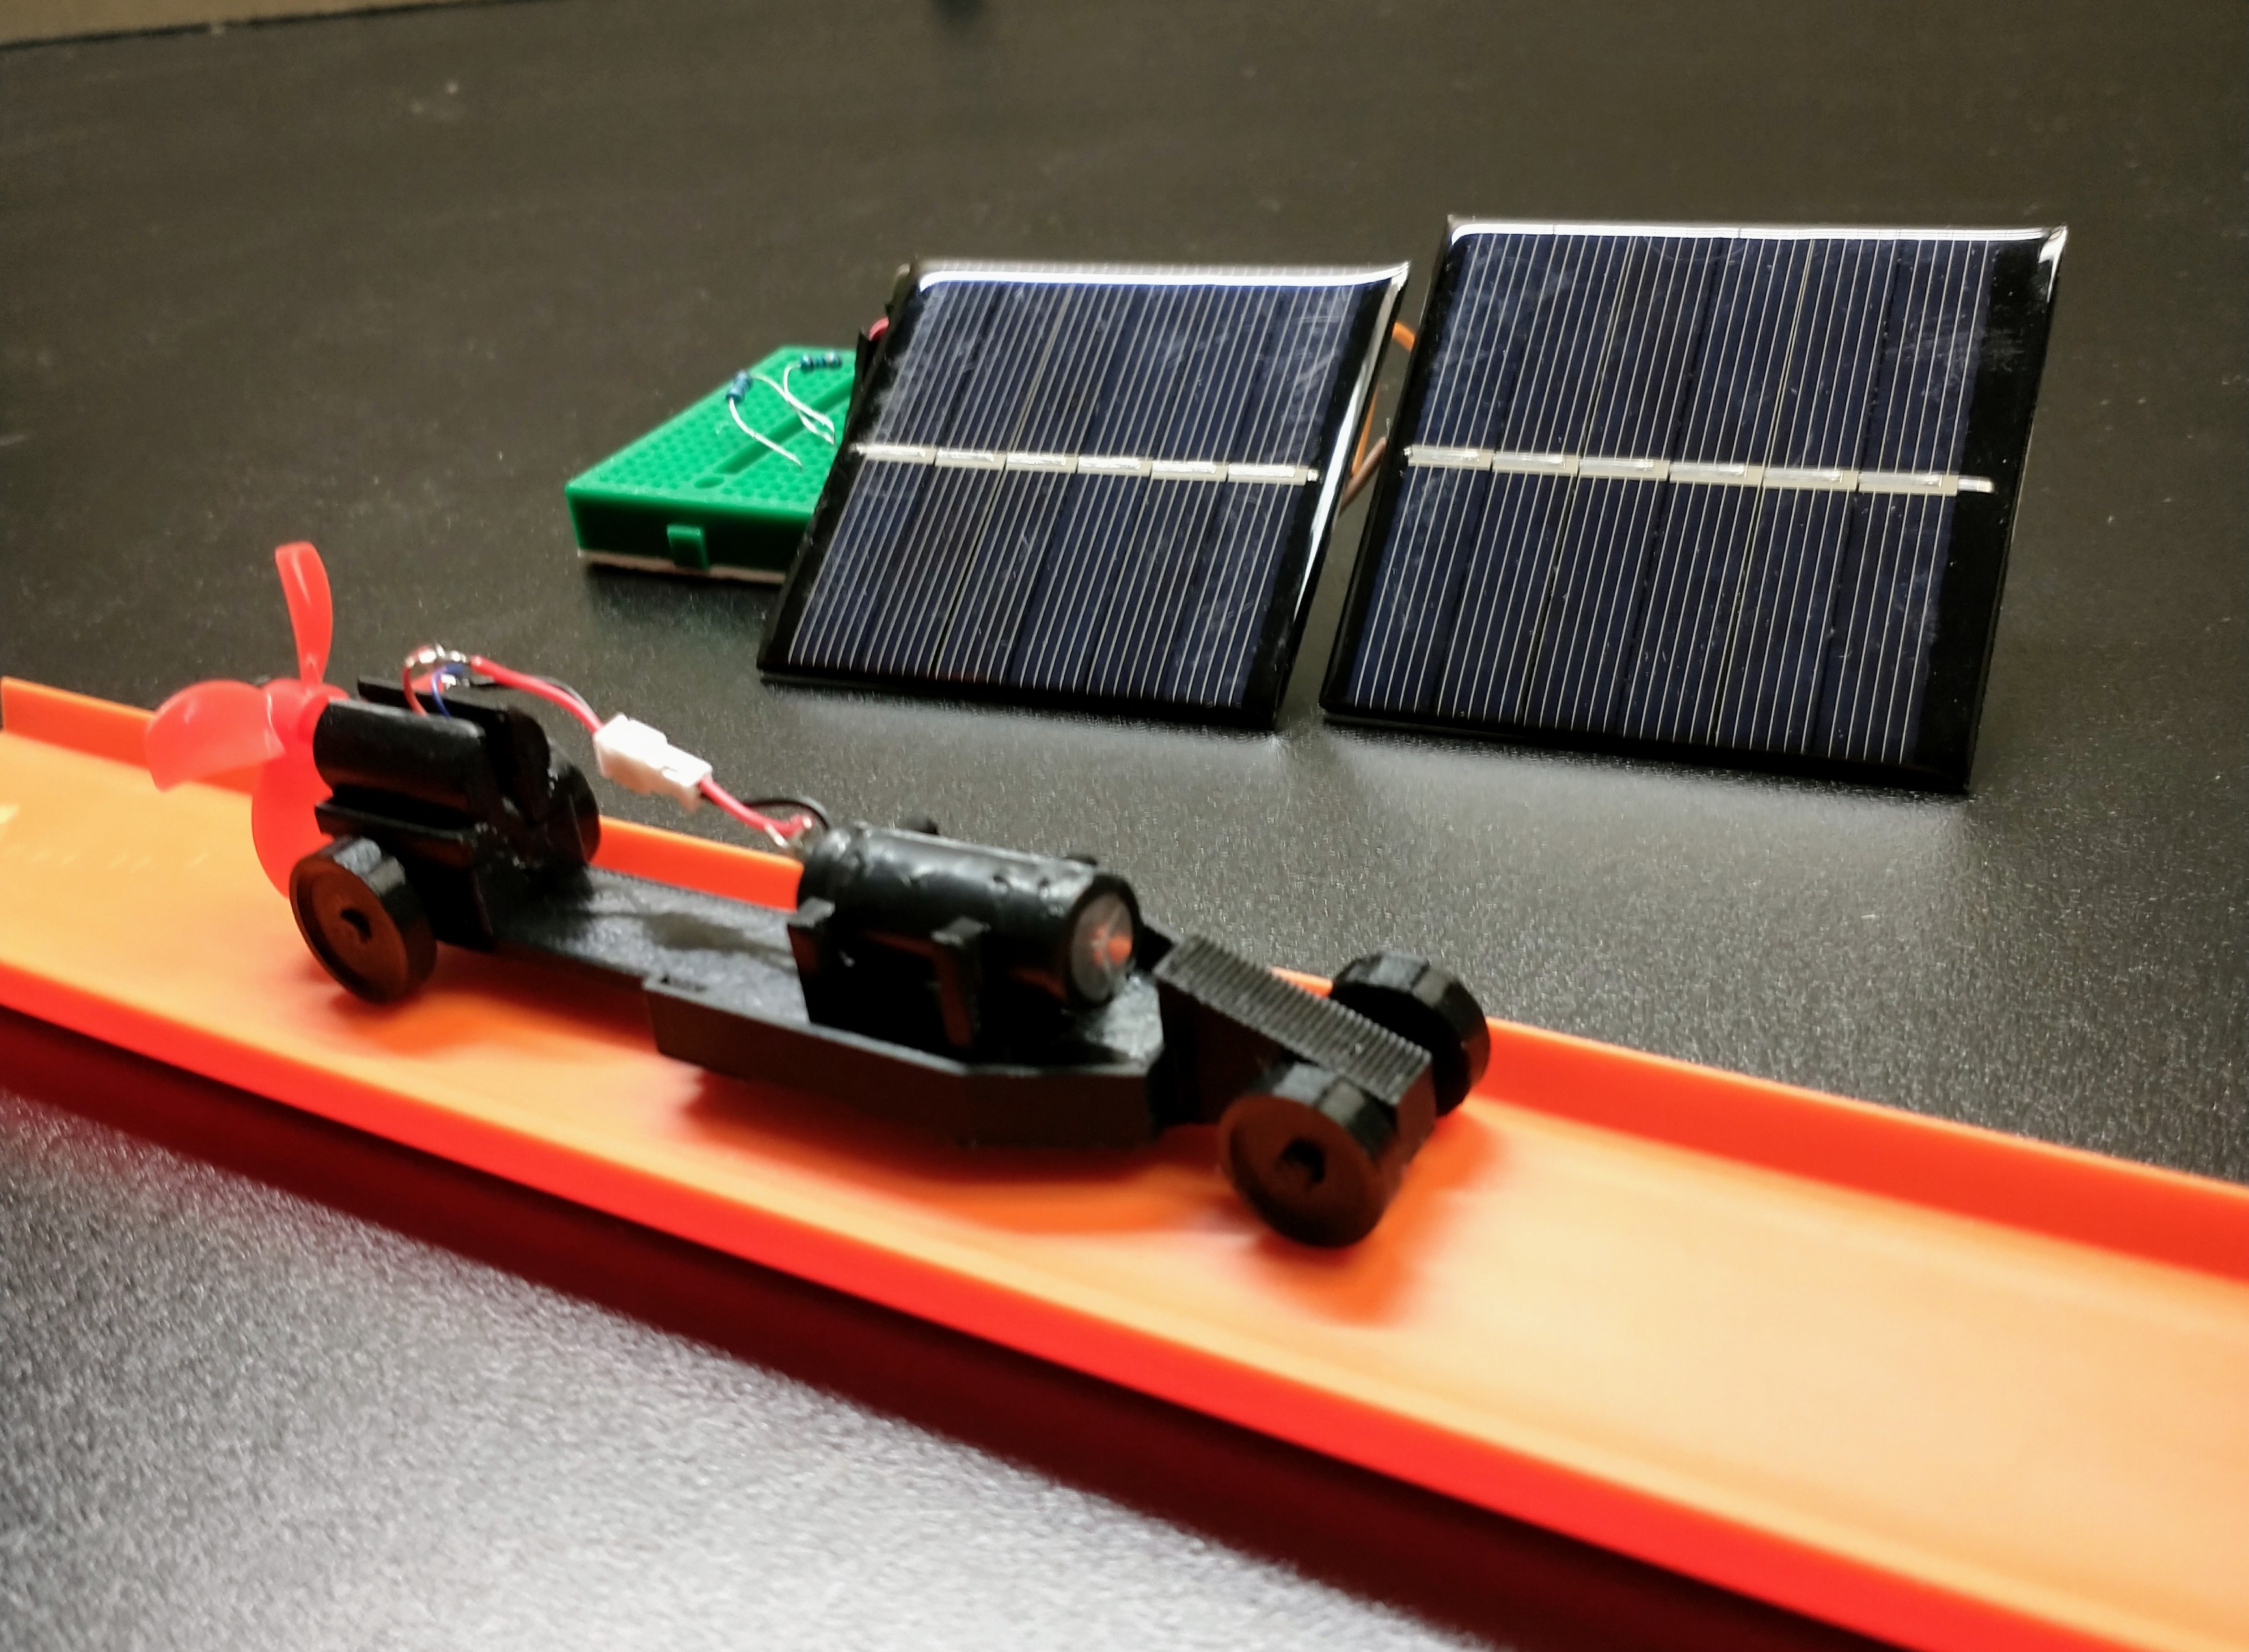 A 3D printed car on orange Hot Wheel track next to two solar cells.